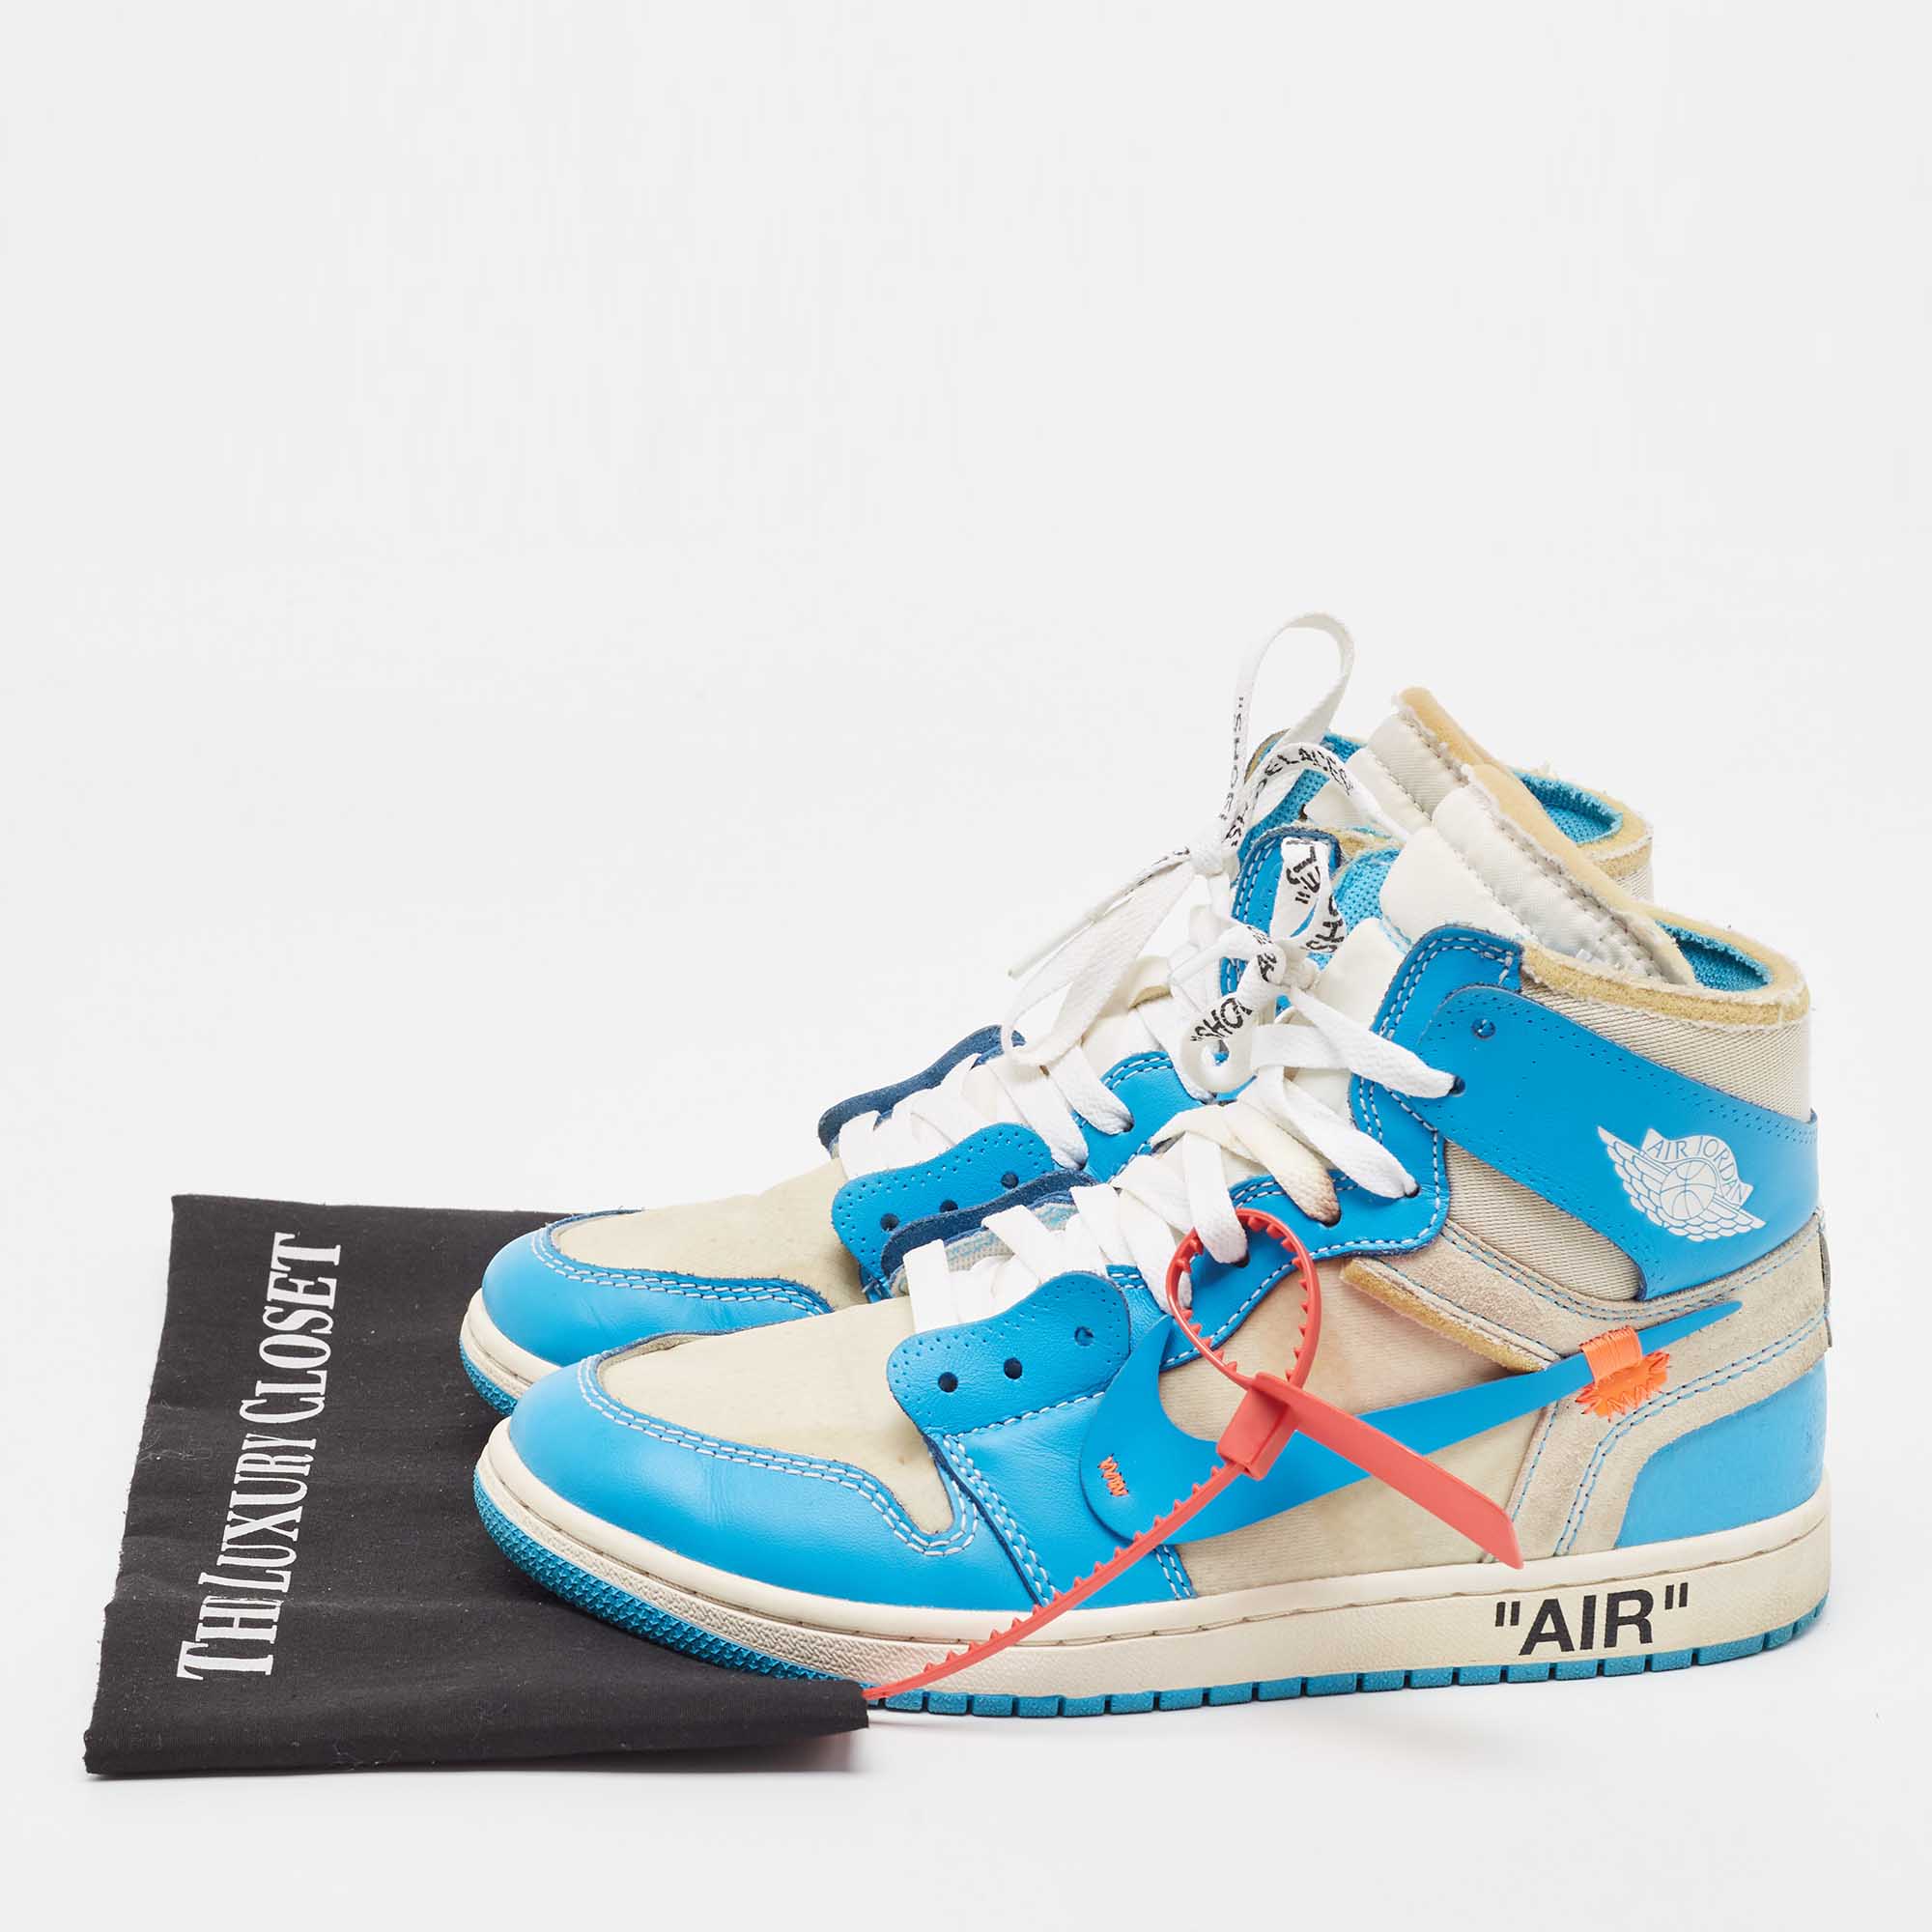 Off-White X Nike Blue/Grey Leather And Mesh Jordan 1 Retro High  Sneakers Size 40.5